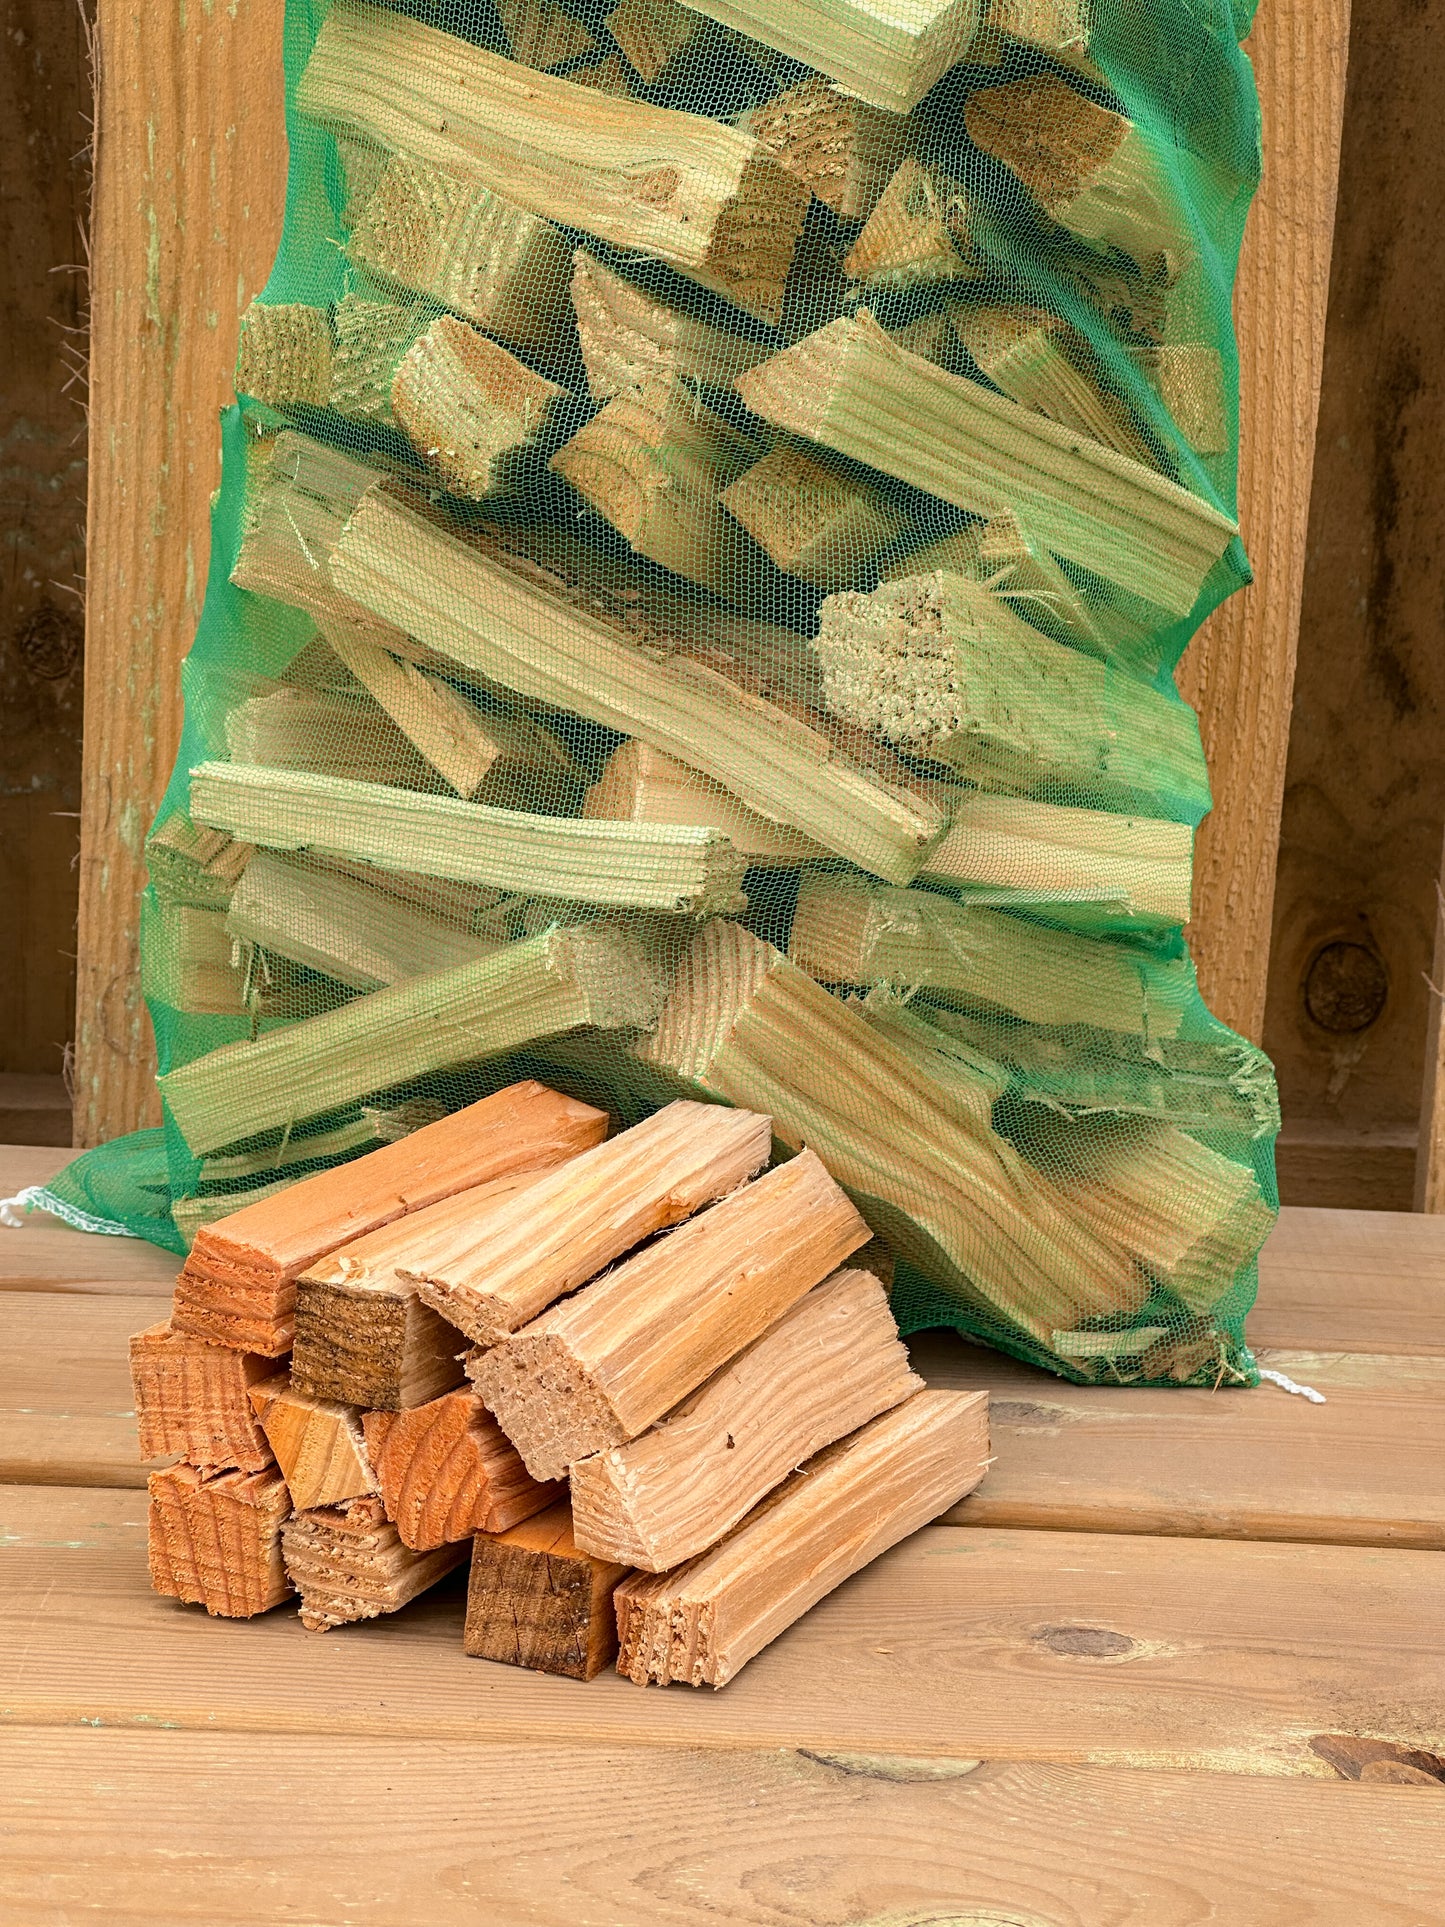 Here is a photo of our dry bags of kindling white pairs perfectly with our seasoned and kiln dried firewood. Small stack of kindling infront of green bag against wooden background.